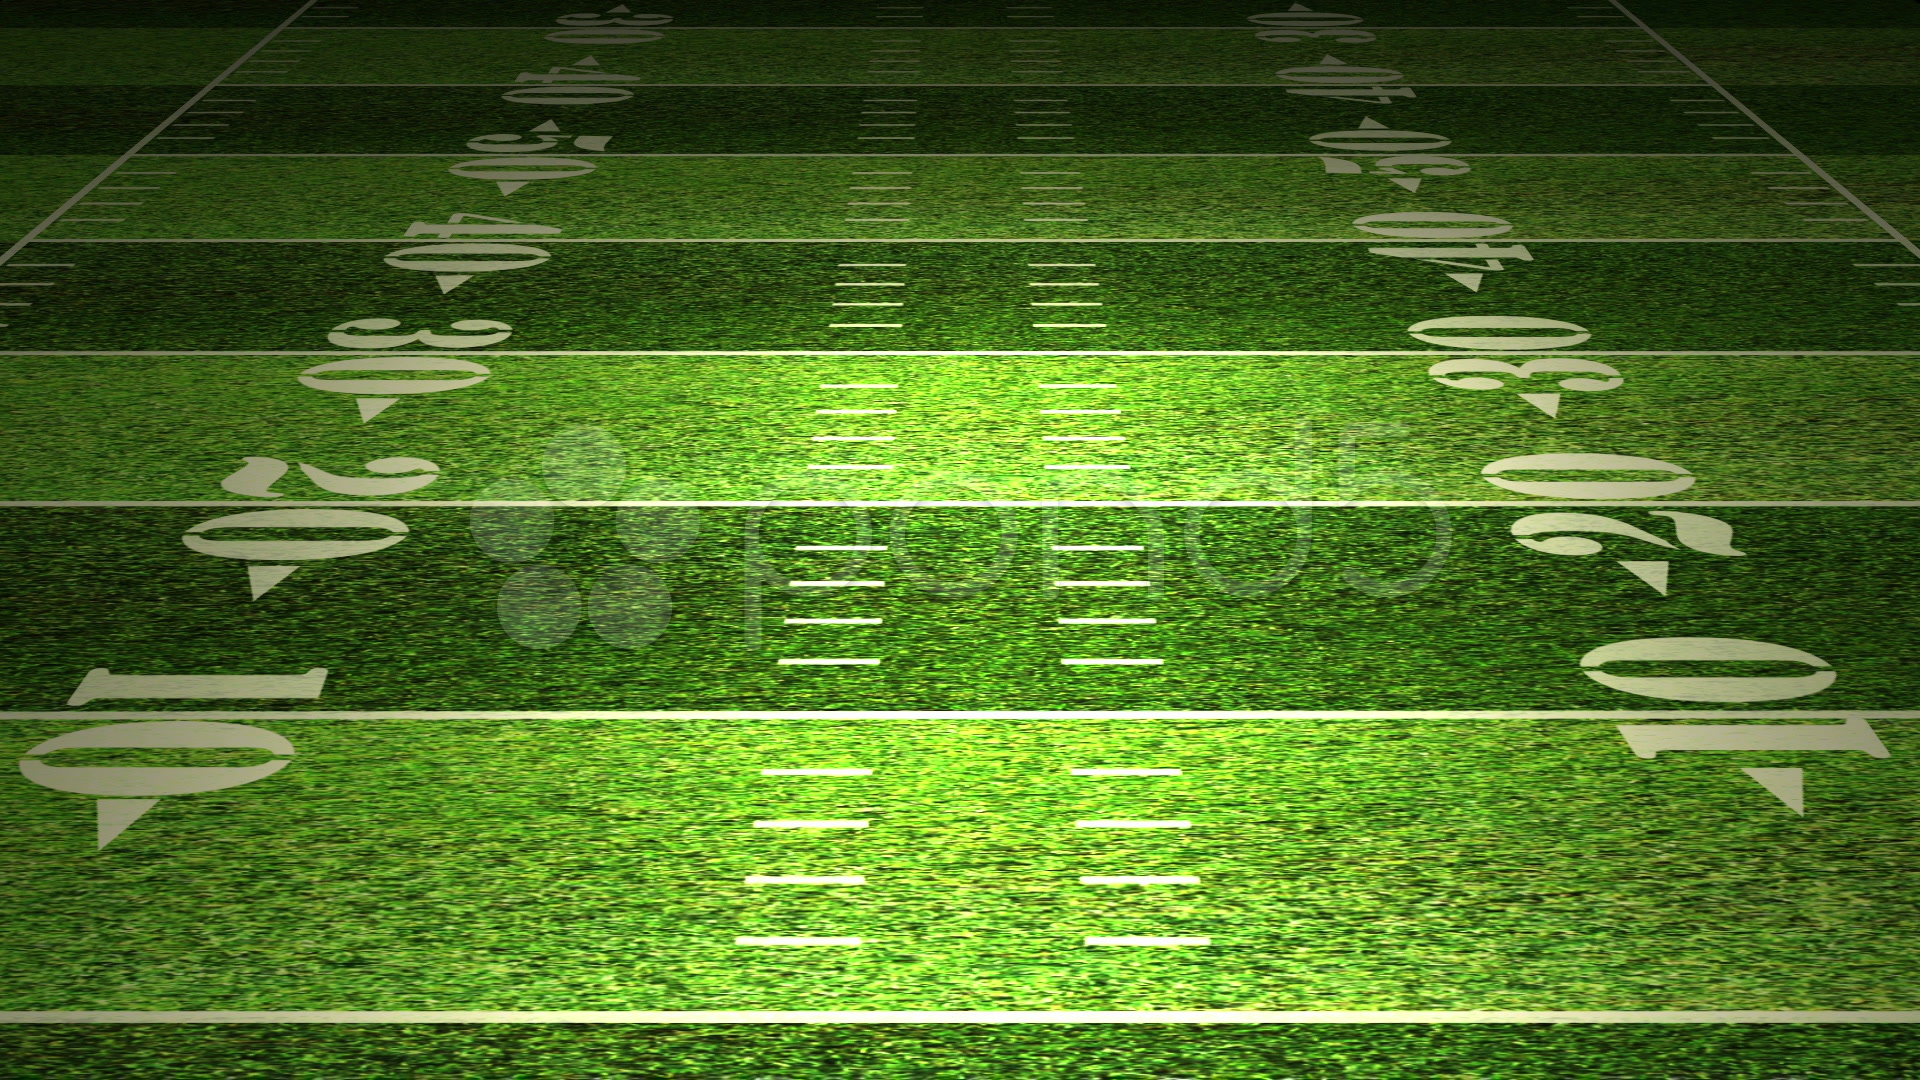 Free download American Football Field Stock Video 1062519 HD Stock Footage [1920x1080] for your Desktop, Mobile & Tablet. Explore Football Stadium Wallpaper. Baseball Stadium Wallpaper, Stadium Crowd Wallpaper, Football